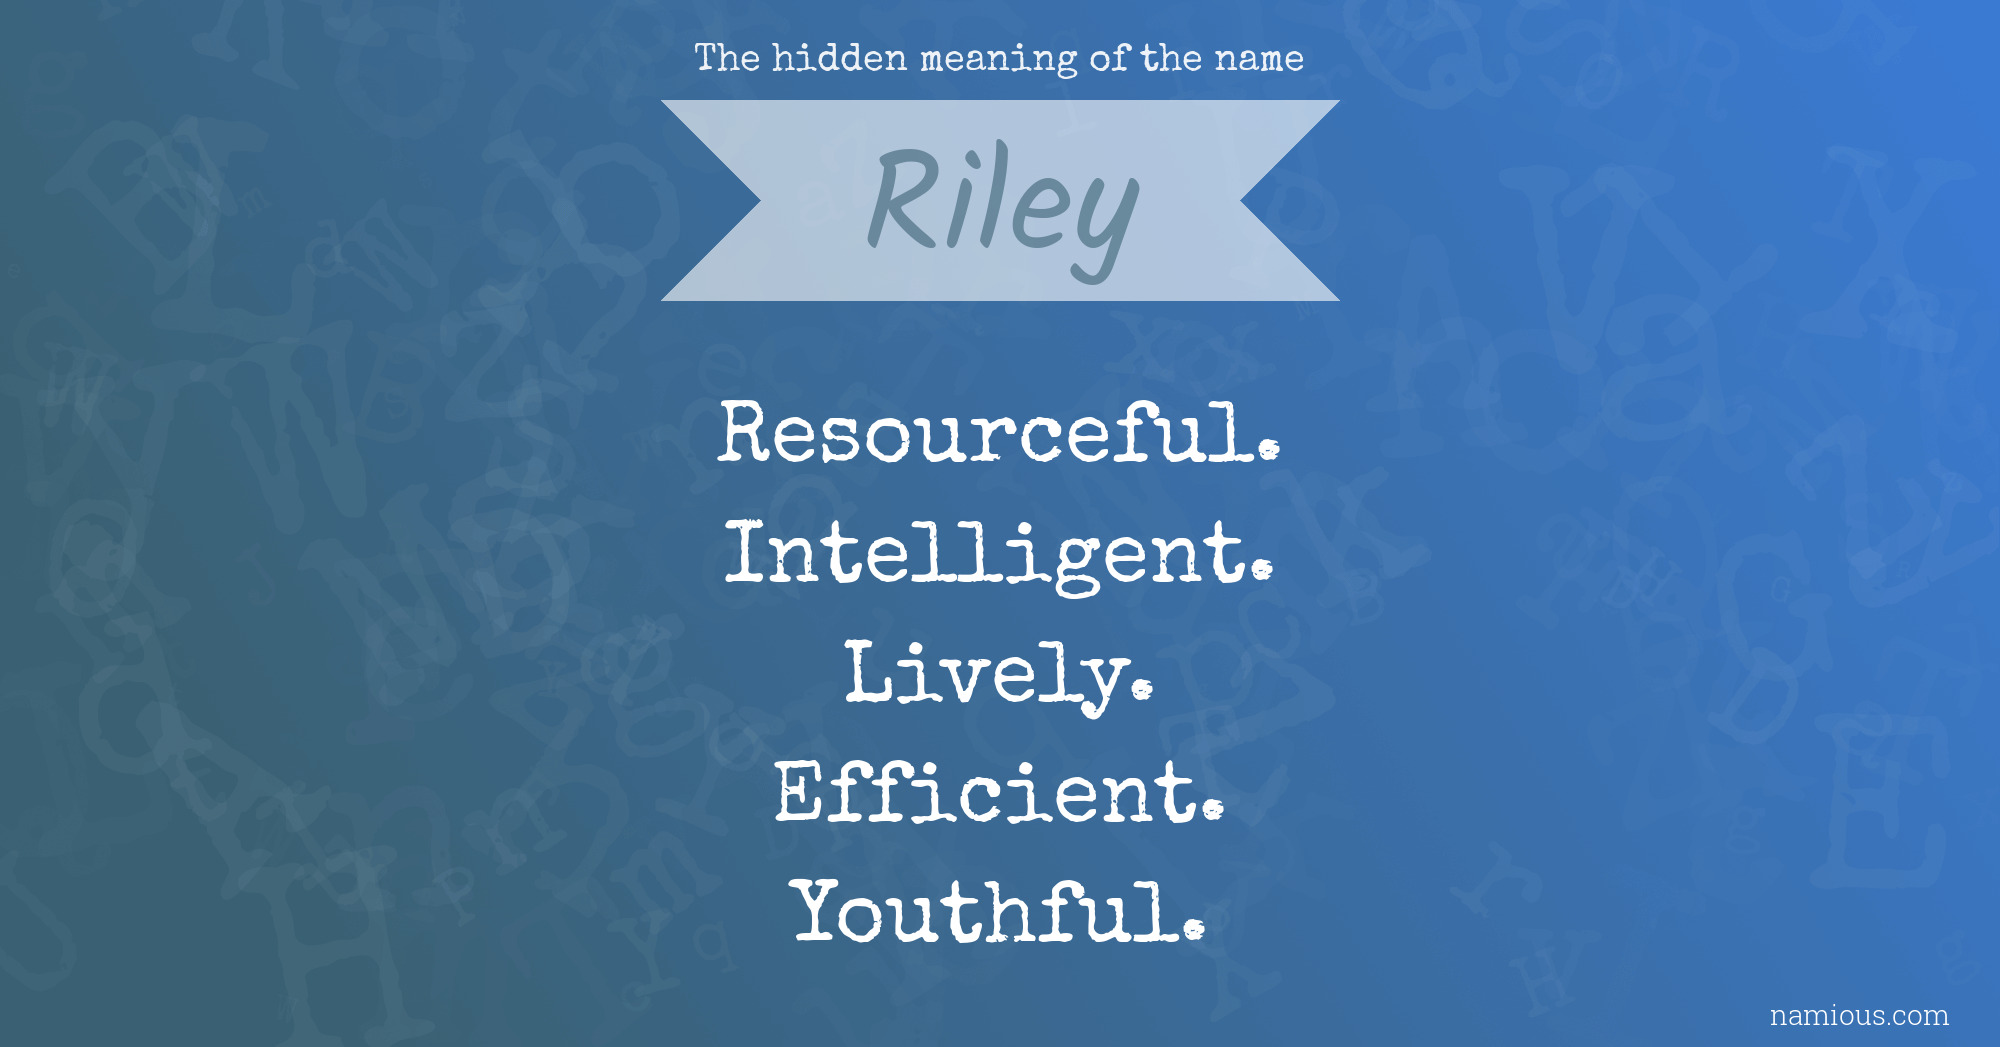 The hidden meaning of the name Riley